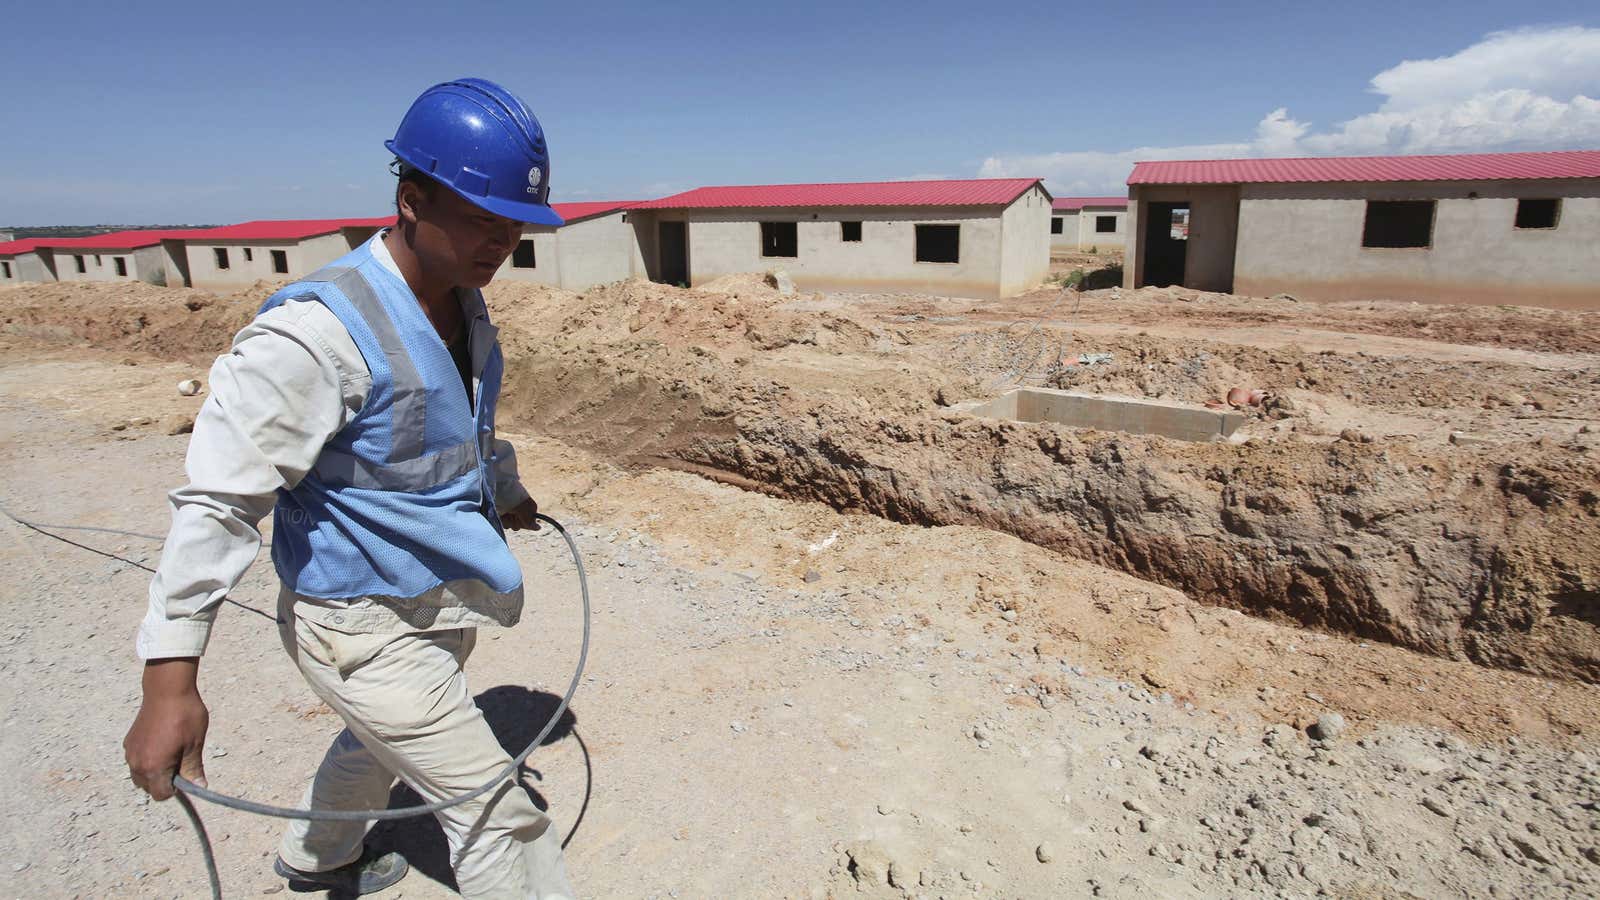 A Chinese worker walks past a construction site in Lubango, Angola (March 2014)